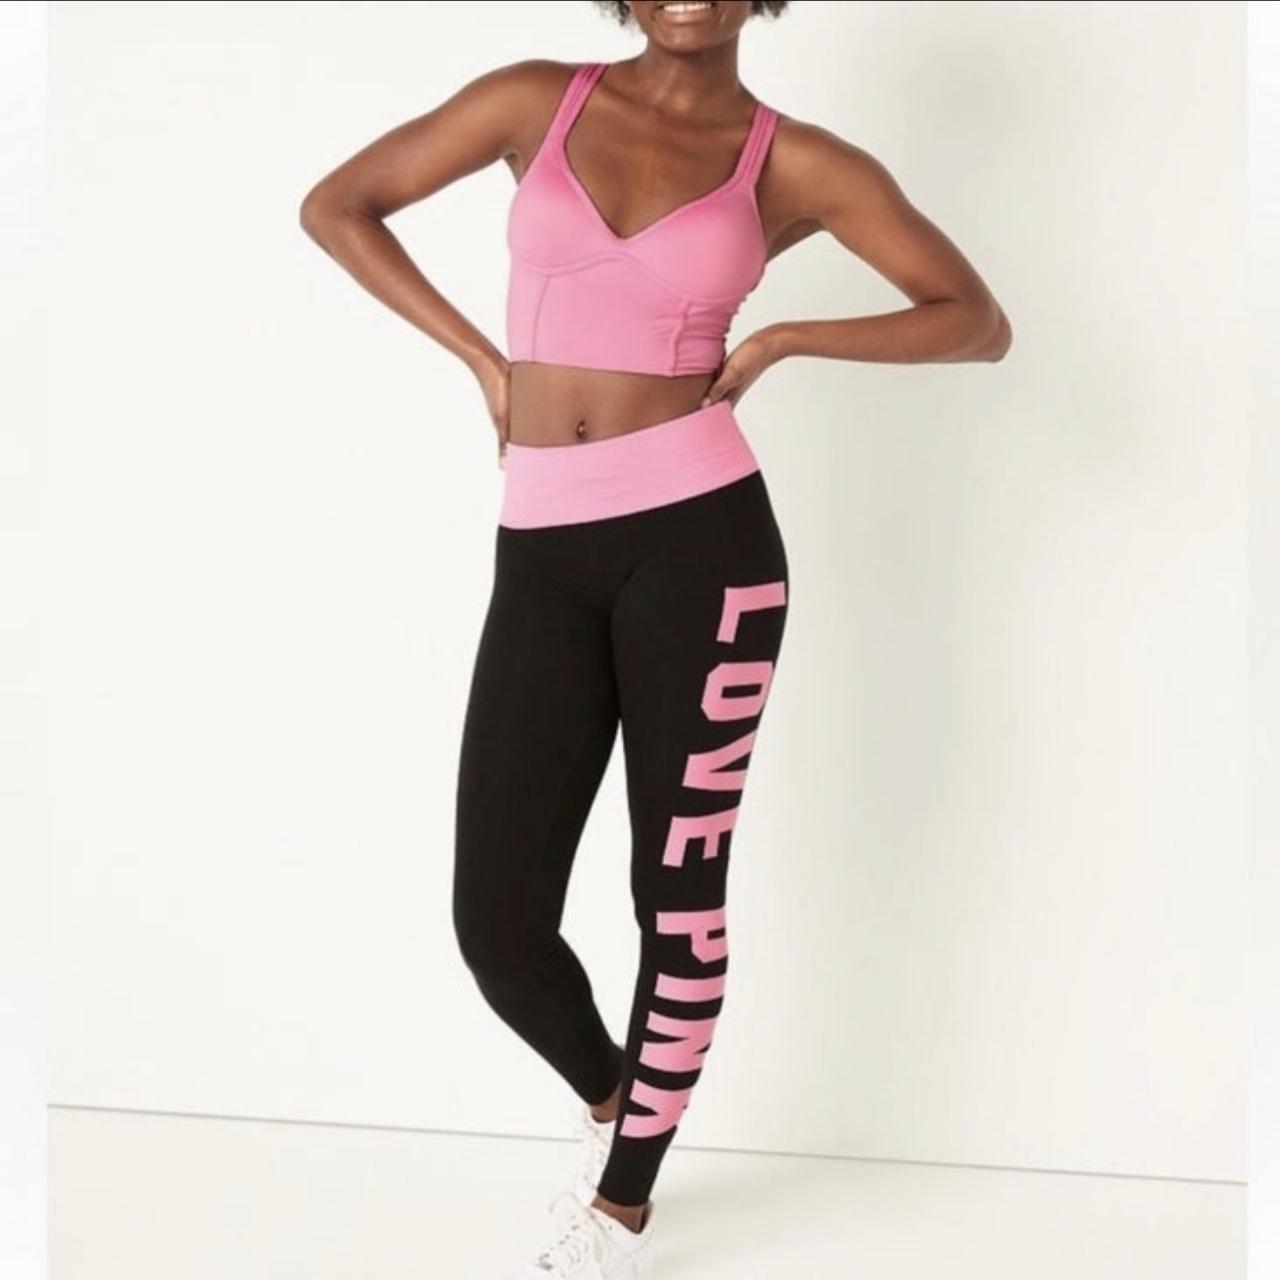 Victoria's Secret PINK Leggings for sale in Budapest, Hungary